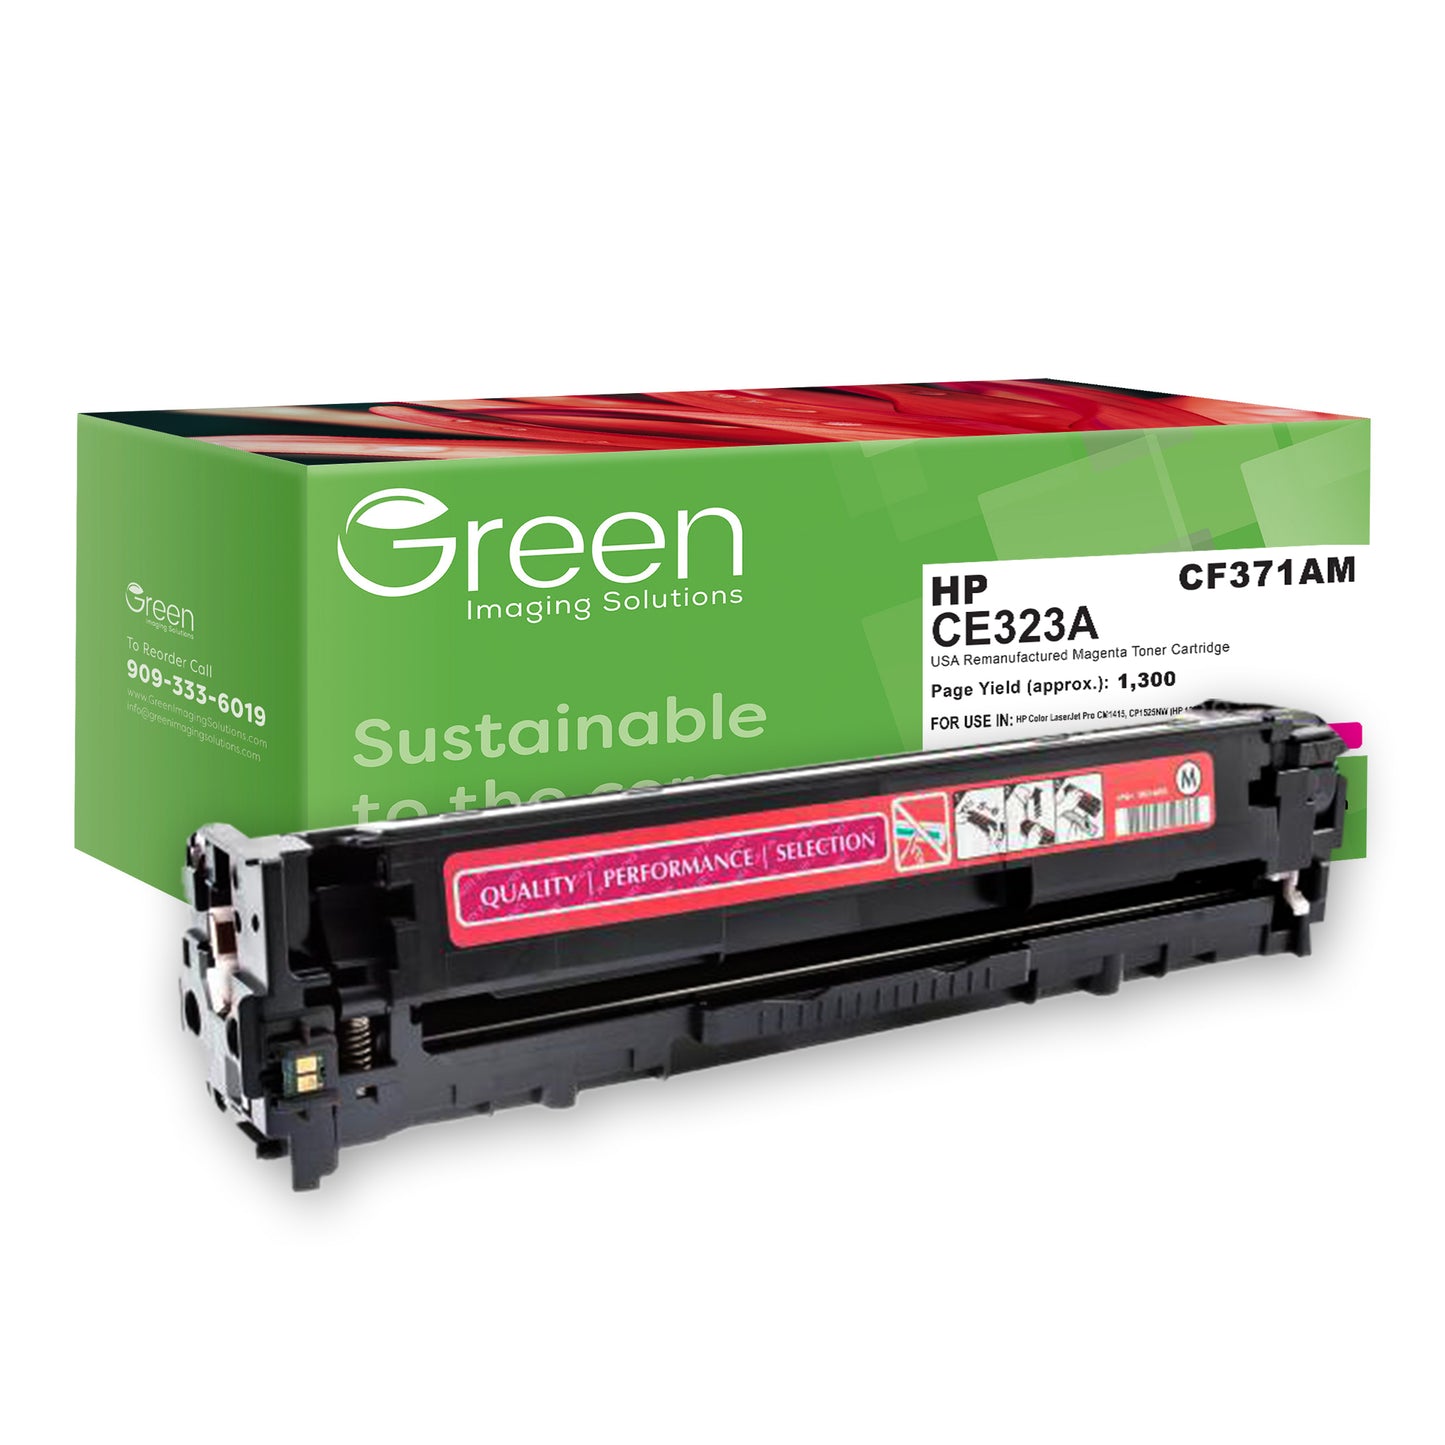 GIS USA Remanufactured Magenta Toner Cartridge for HP CE323A (HP 128A)